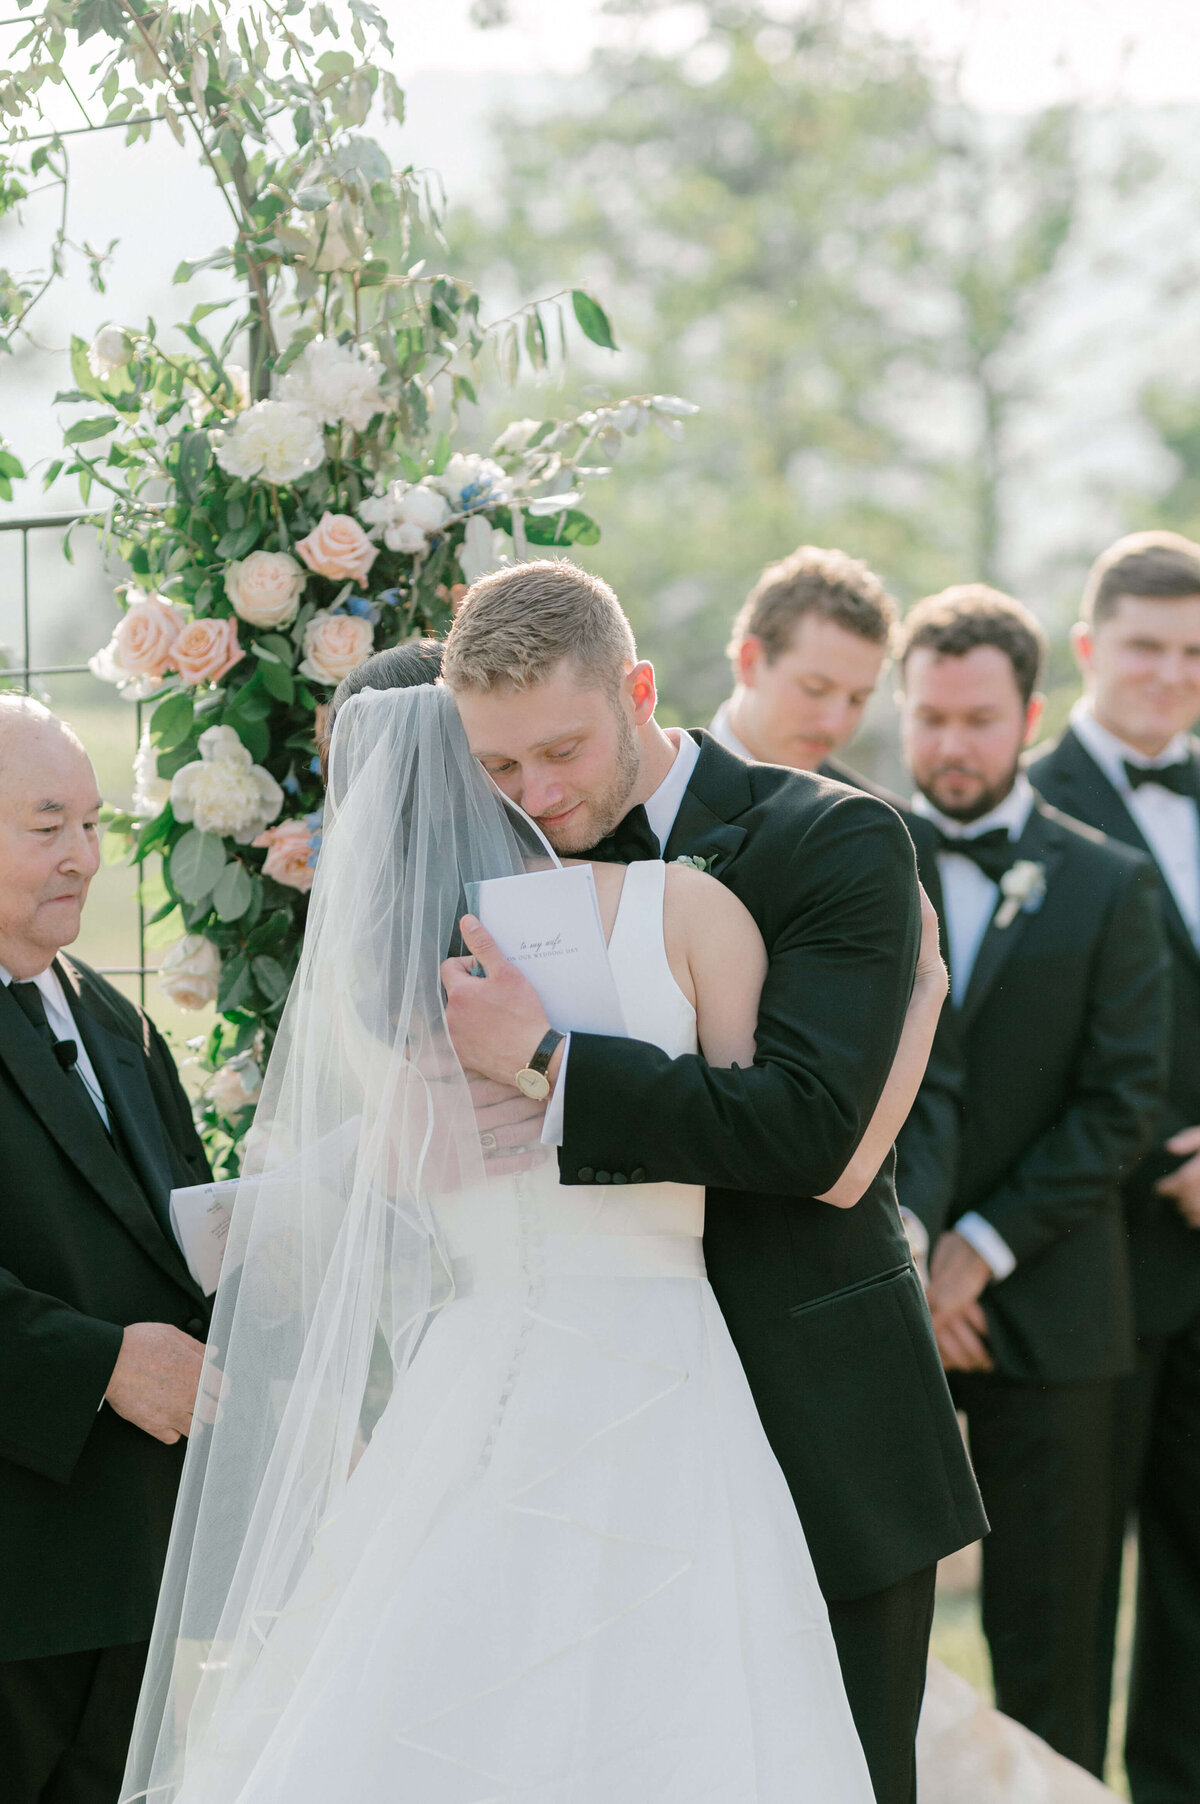 Emotion filled image of a groom hugging his bride after reading their vows to one another, captured by Rachael Mattio